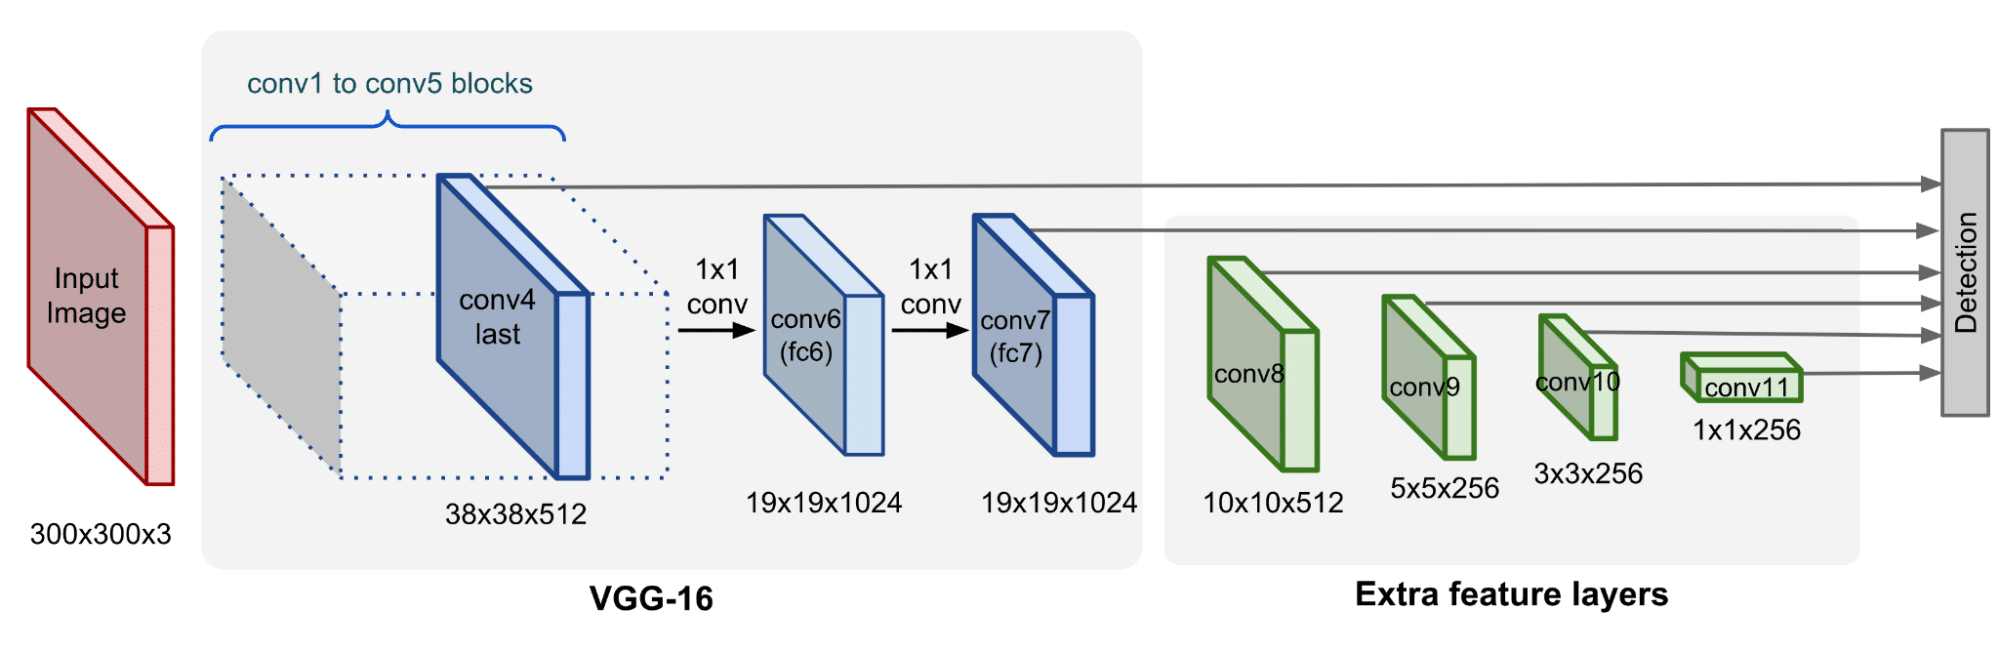 A figure showing a model architecture of SSD